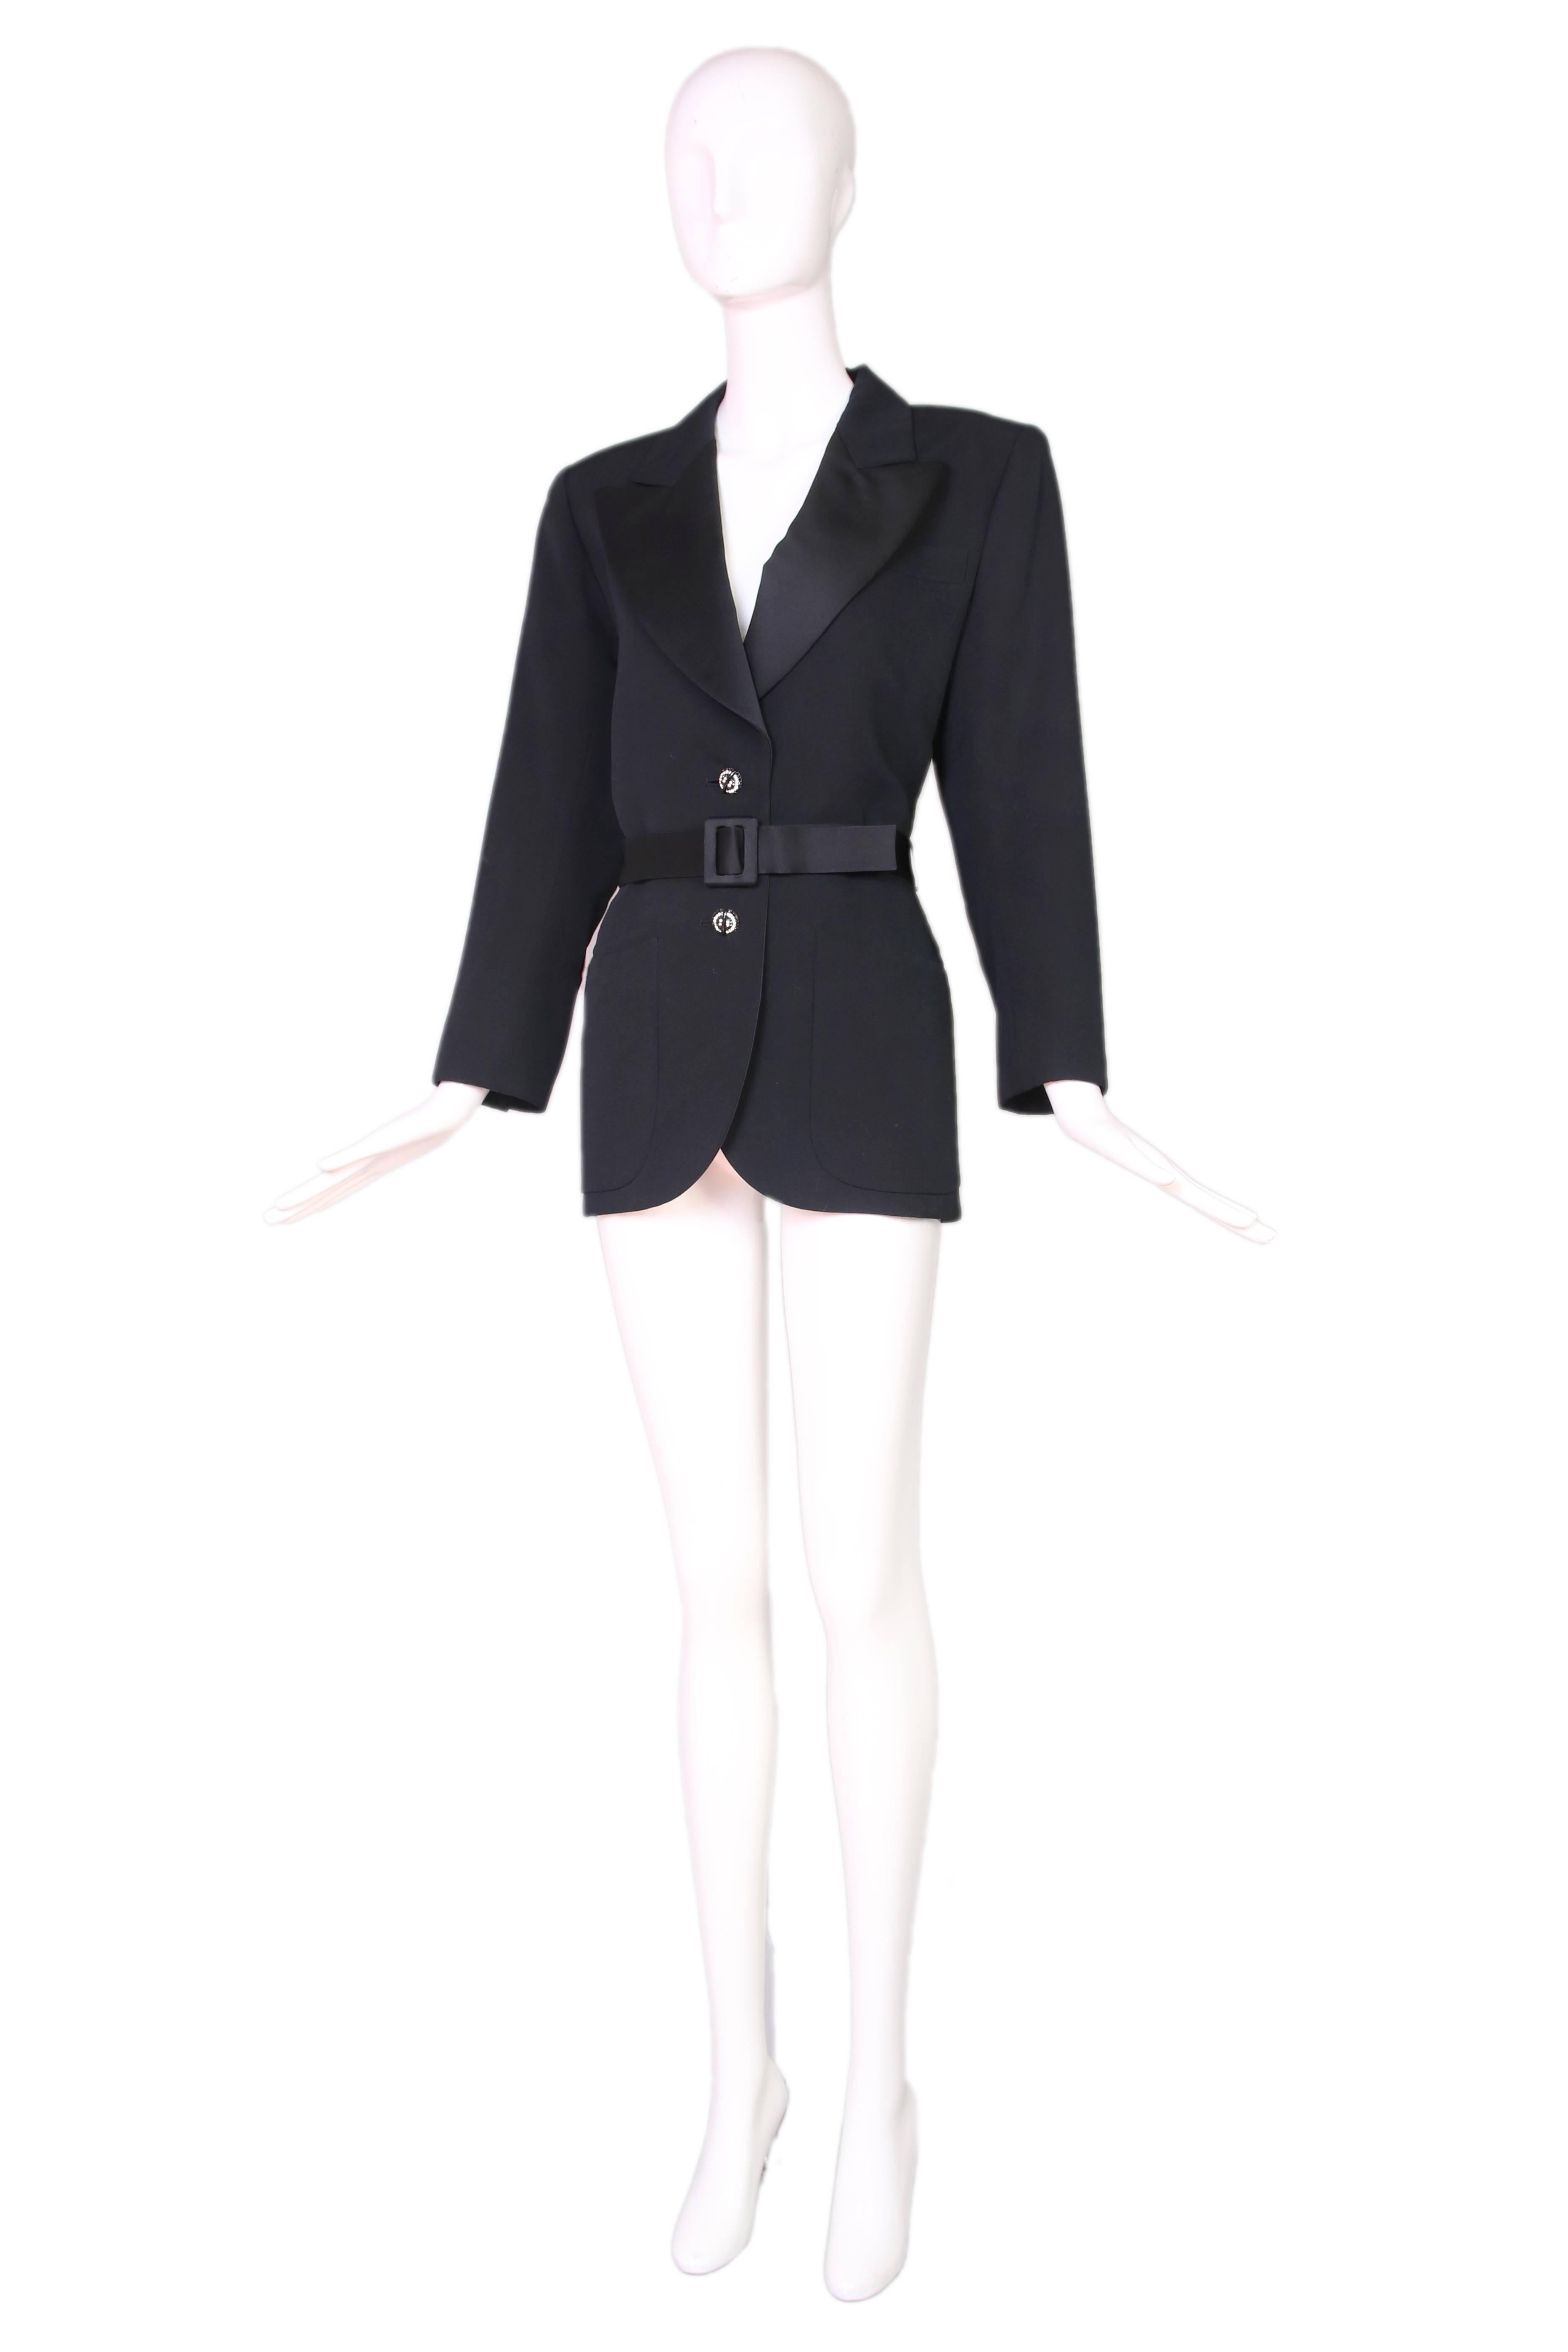 1970's Yves Saint Laurent black "Le Smoking" jacket with satin trim & belt. In excellent condition - missing one button at the sleeve. Size EU 36.
MEASUREMENTS:
Bust - 36"
Waist - 32"
Hips - 40"
Length - 30"